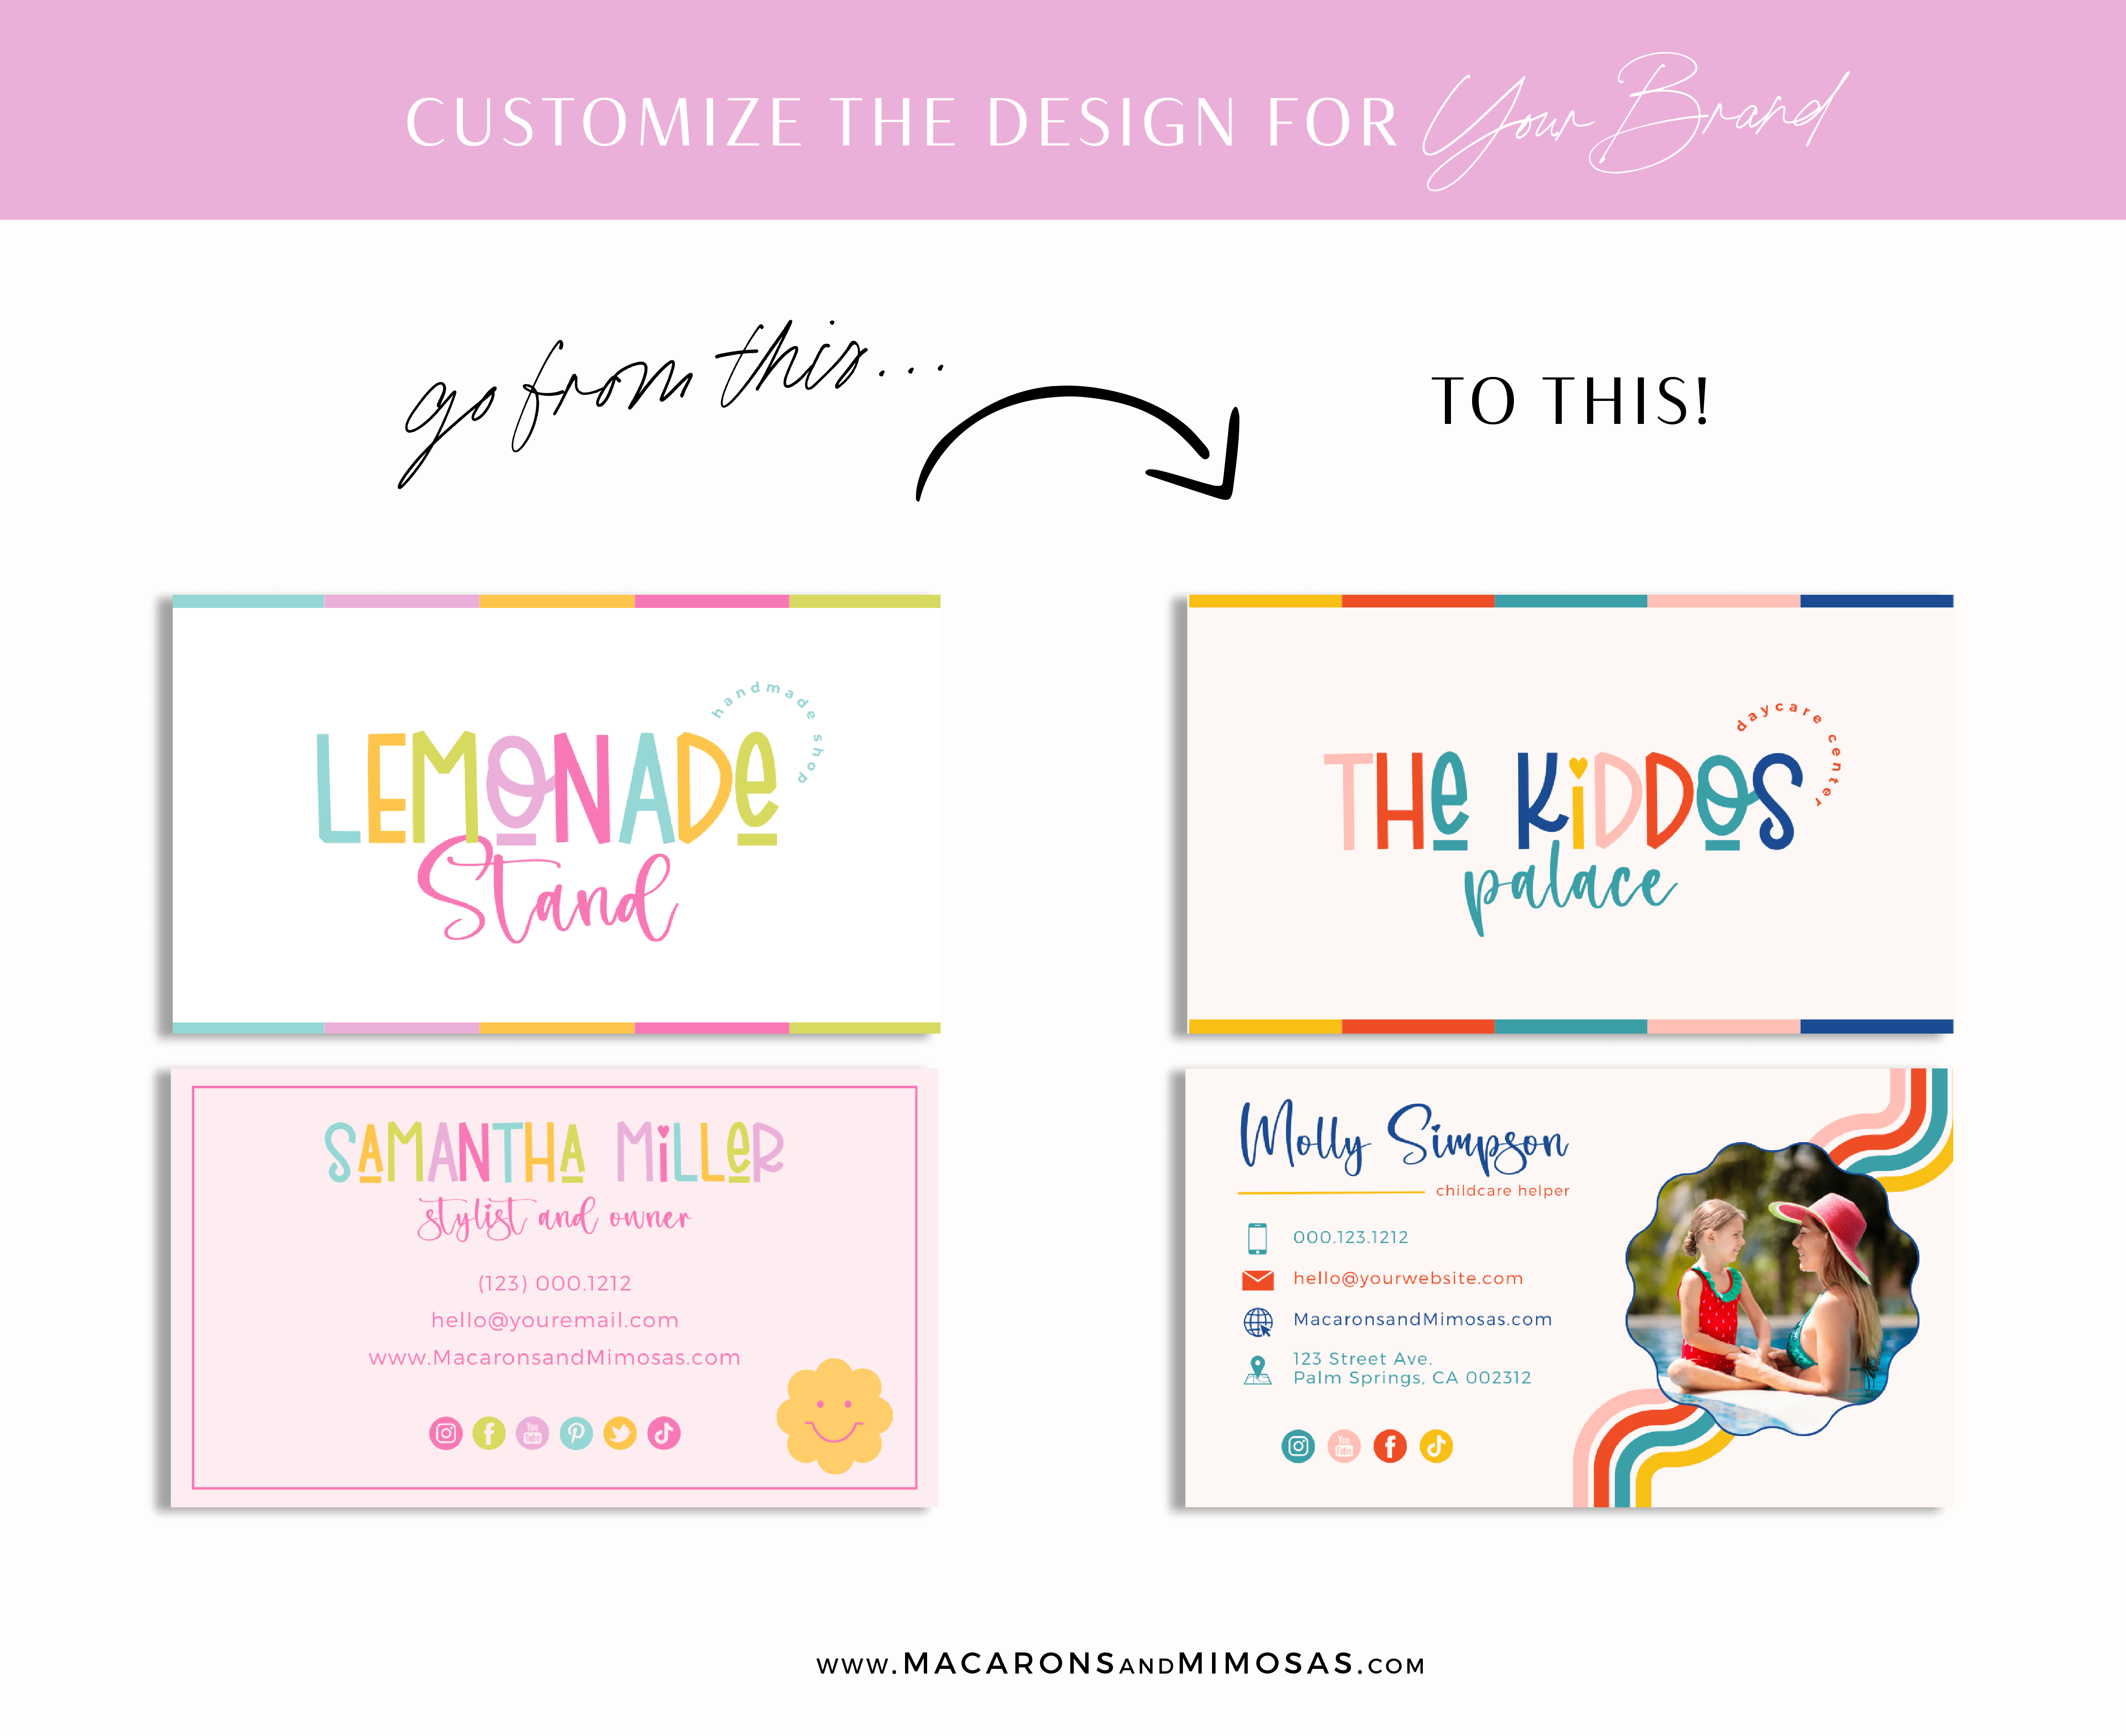 Bright Rainbow Retro Editable Business Card Template edit in Canva. Retro DIY business logo with stars and hearts in a bright colorful design.